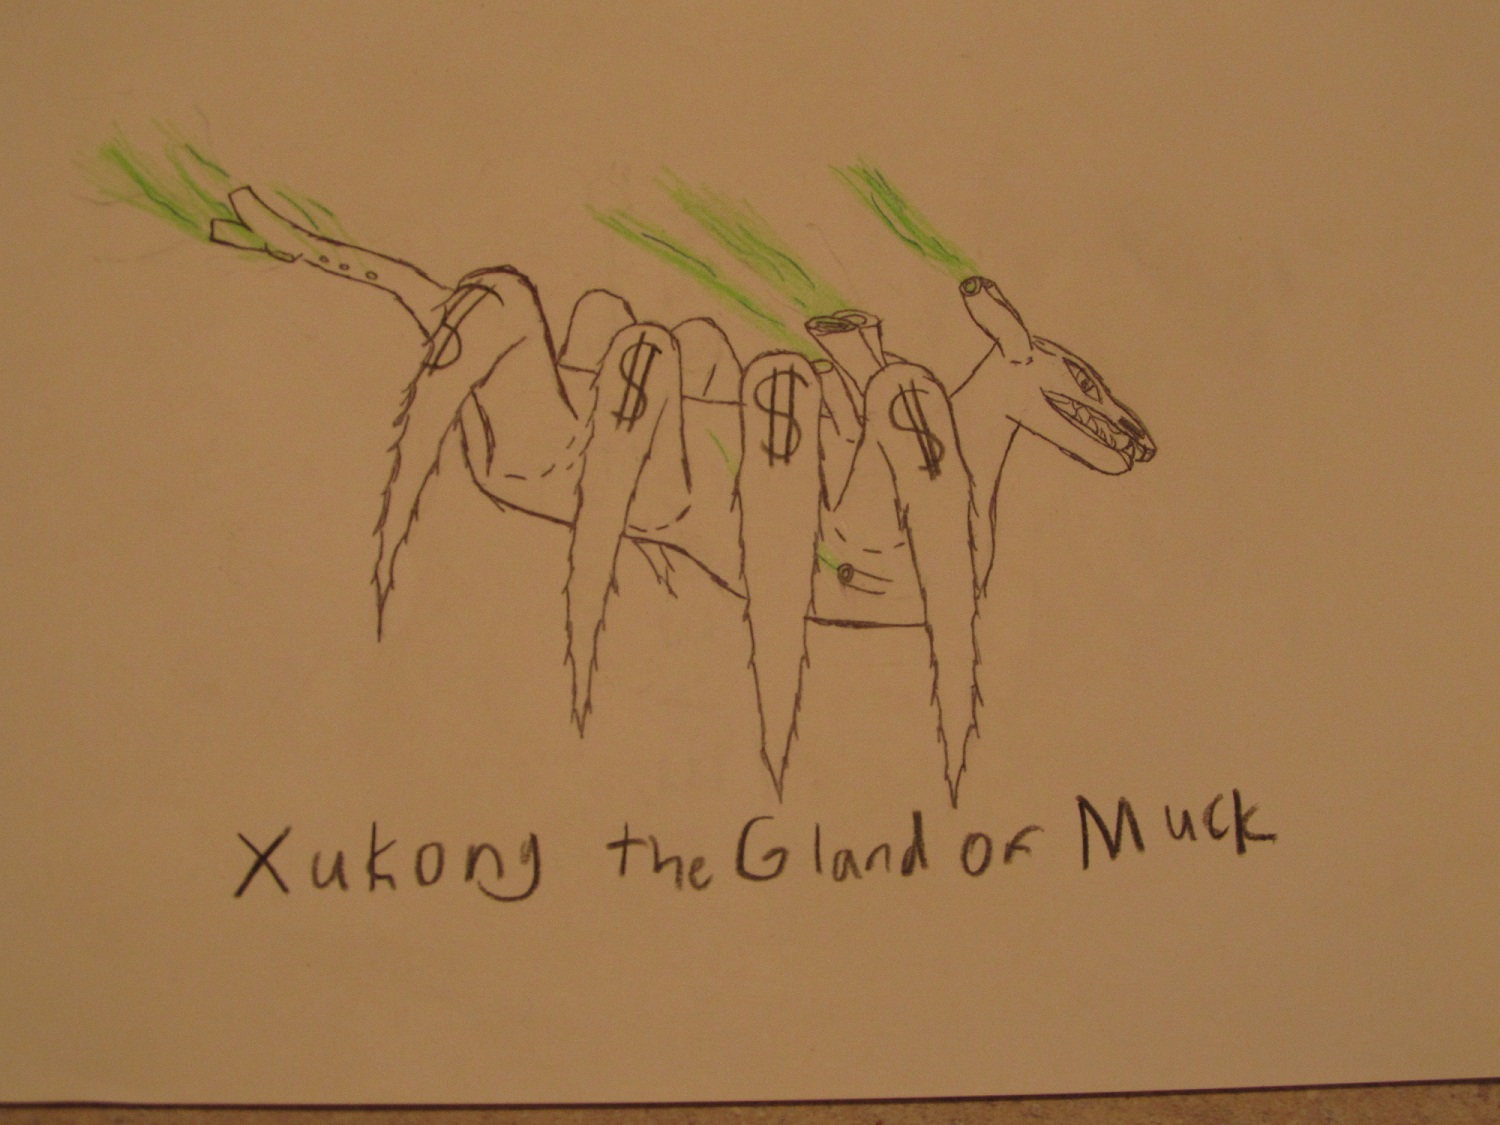 Xukong the Gland of Muck by Terrahex